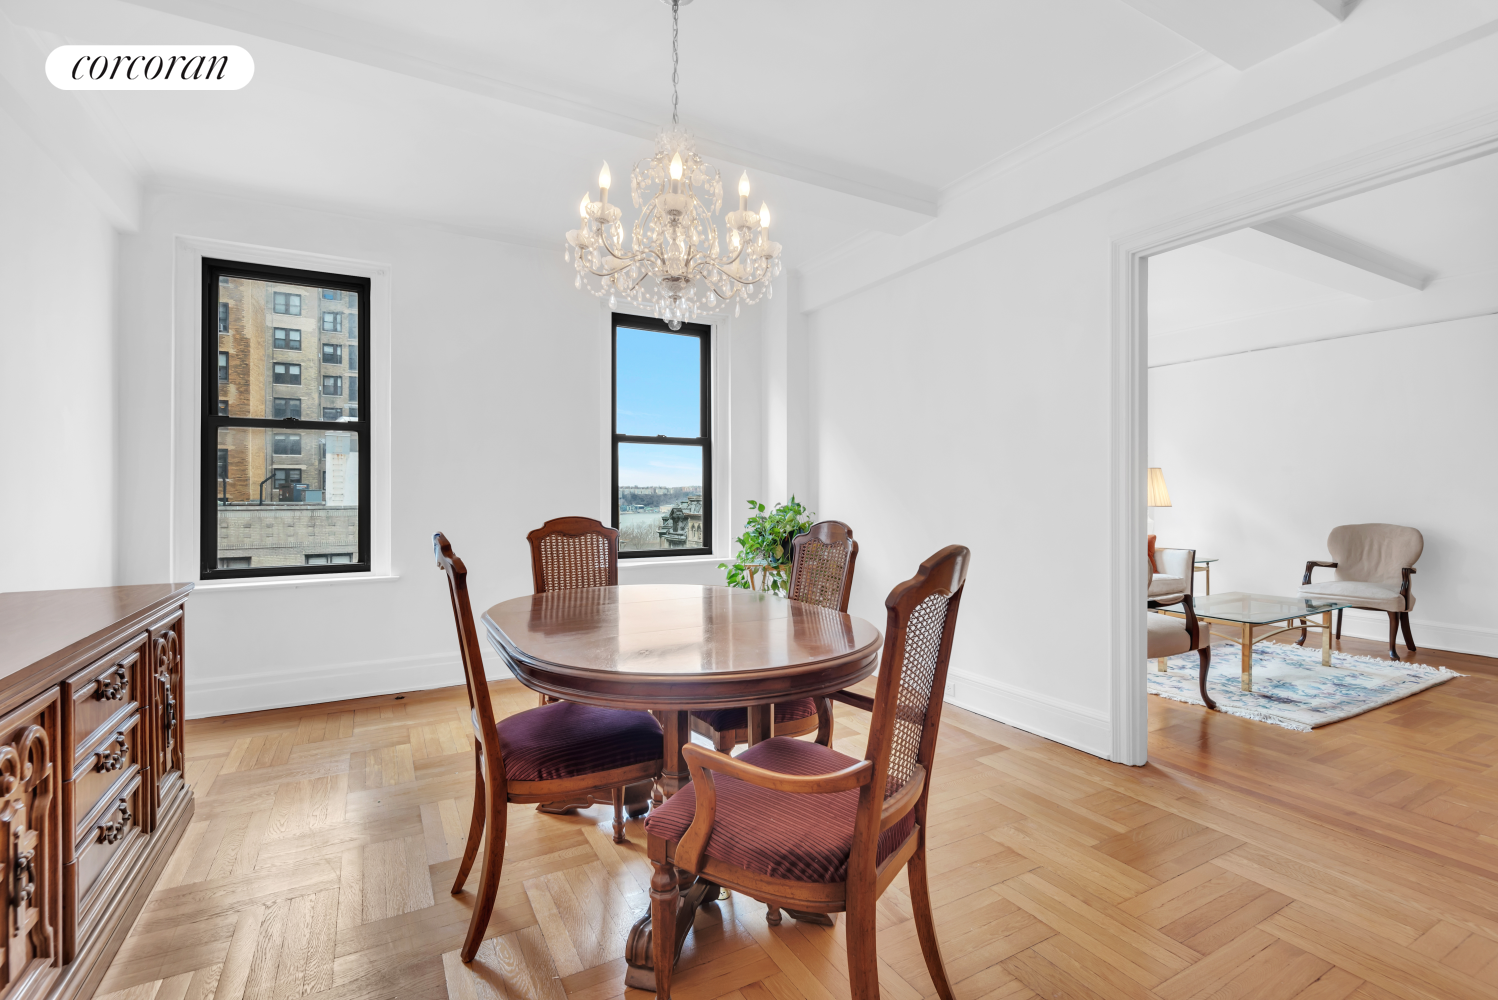 260 West End Avenue 7A, Lincoln Sq, Upper West Side, NYC - 2 Bedrooms  
2.5 Bathrooms  
5 Rooms - 